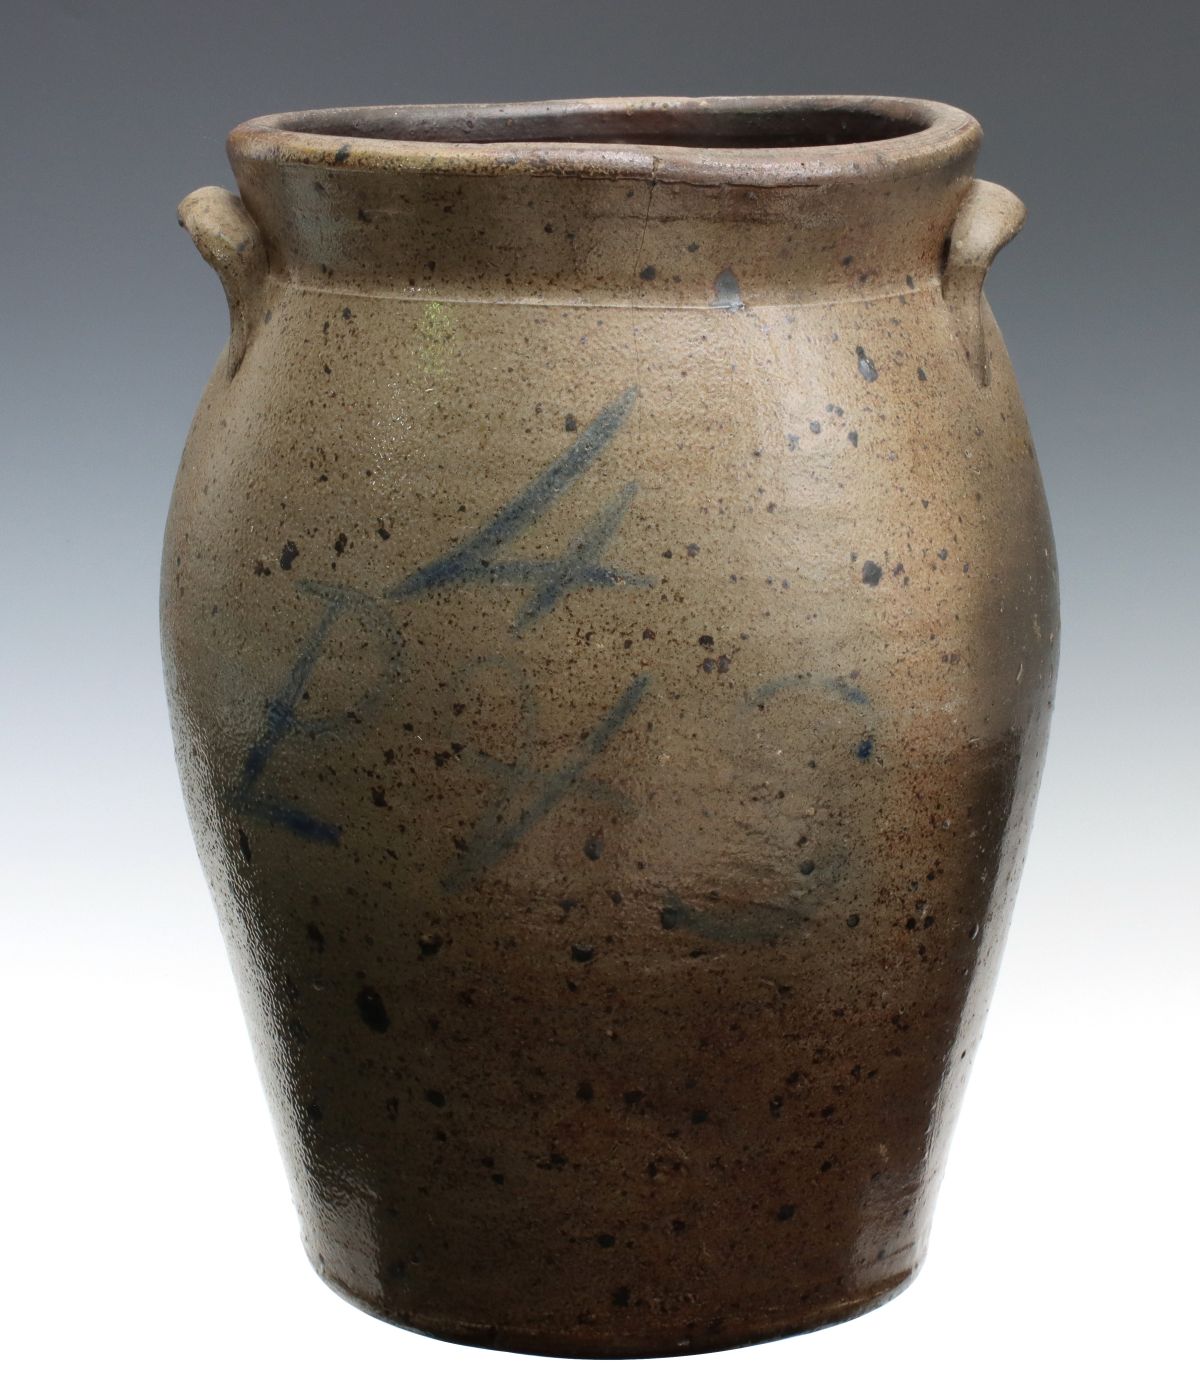 AN EARLY 19TH C. BLUE DECORATED AMERICAN STONEWARE JAR